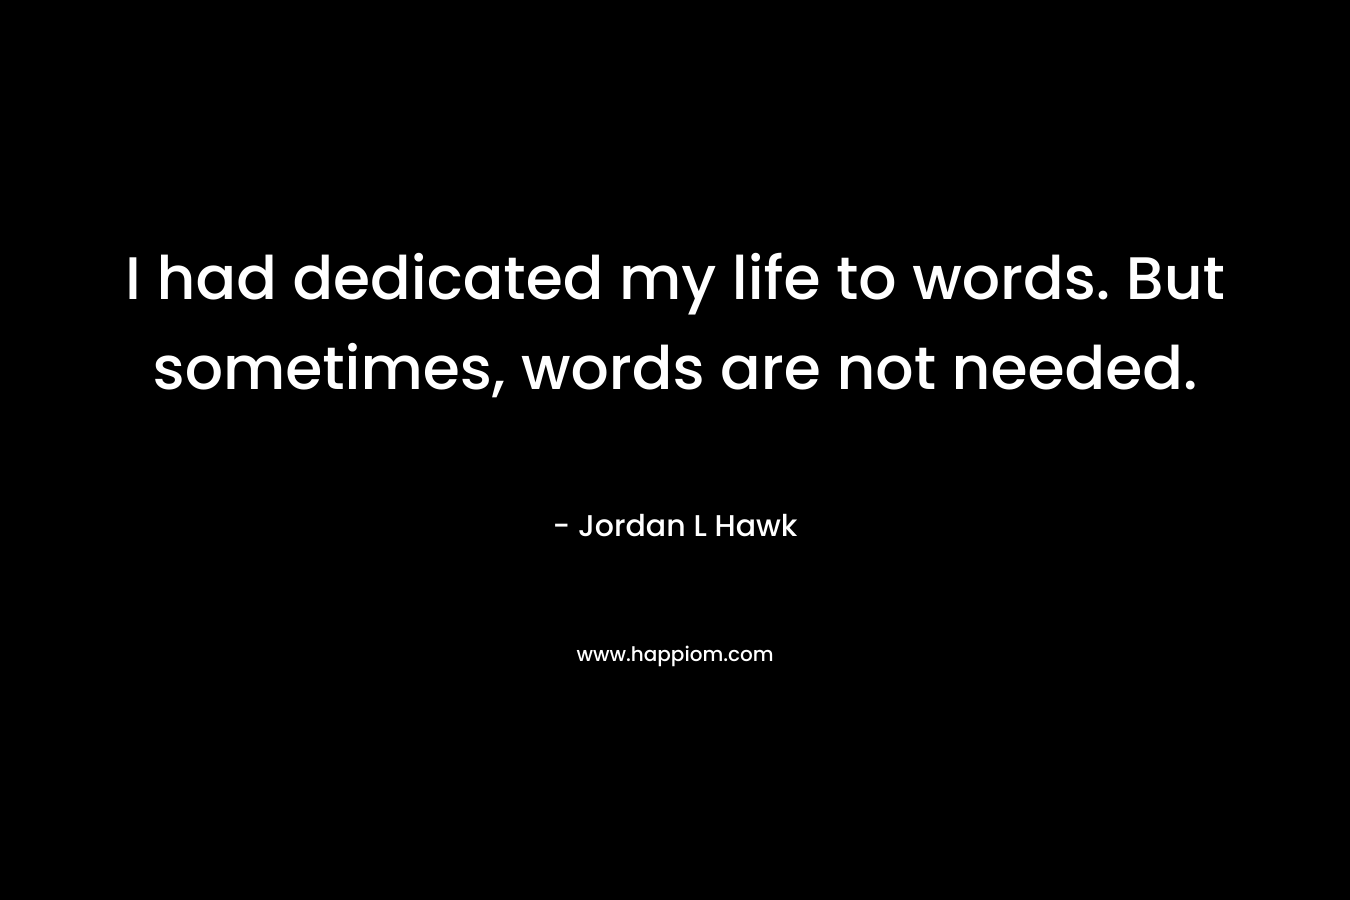 I had dedicated my life to words. But sometimes, words are not needed. – Jordan L Hawk